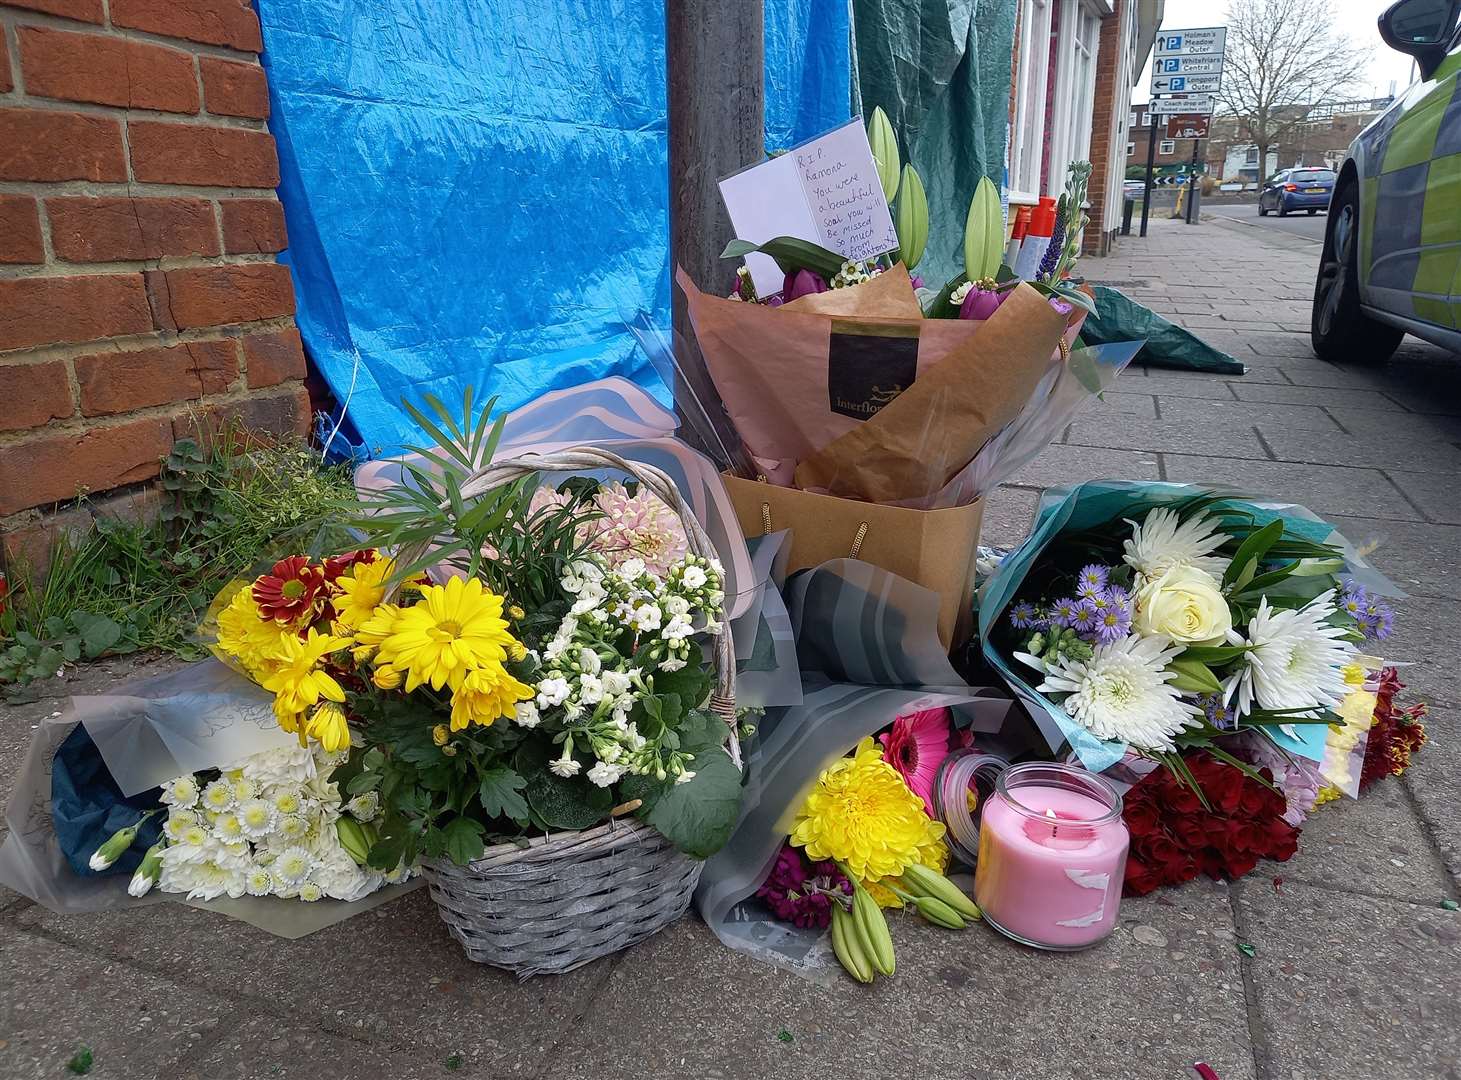 Floral tributes have been placed outside GothInk Studio